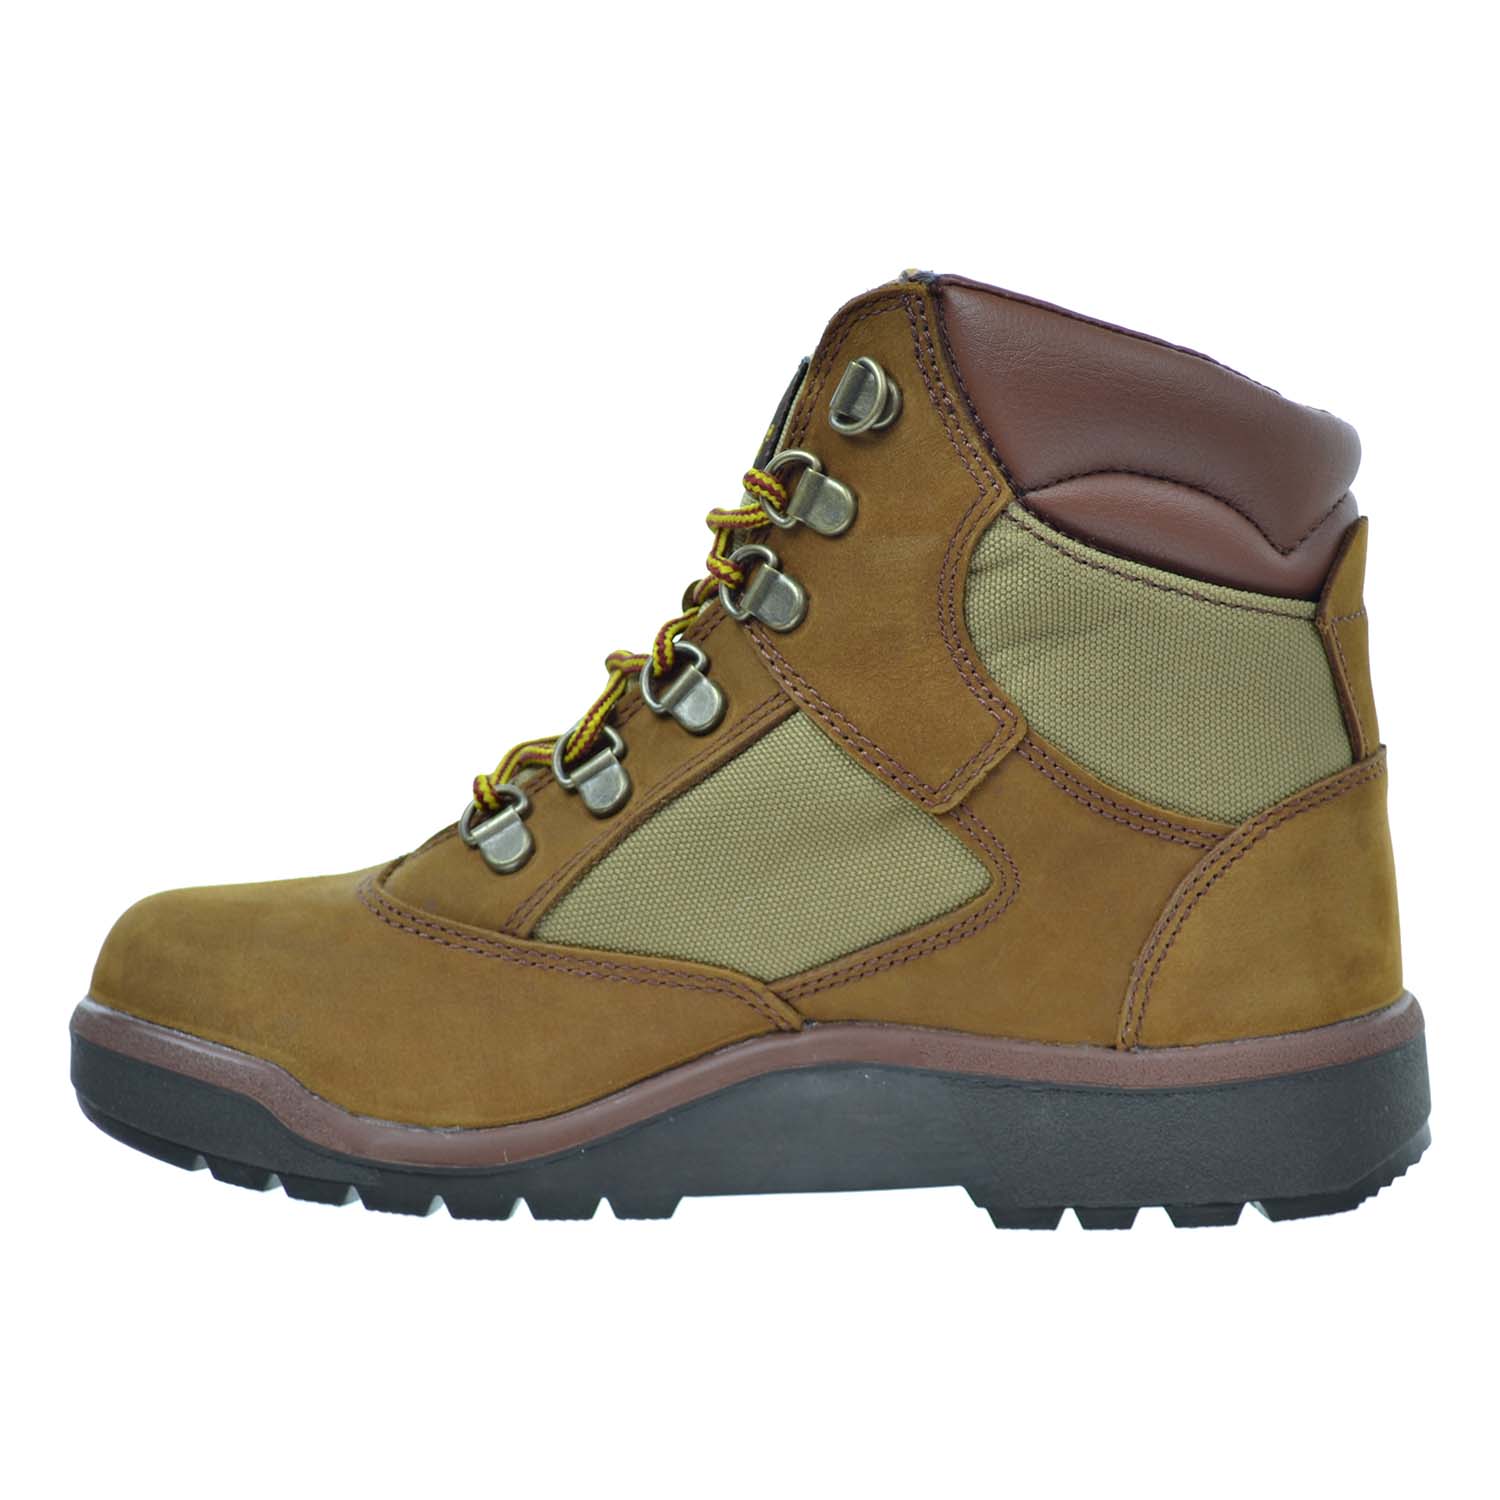 Timberland 6 Inch L-F Big Kid's Field Boots Brown weather proof hiking